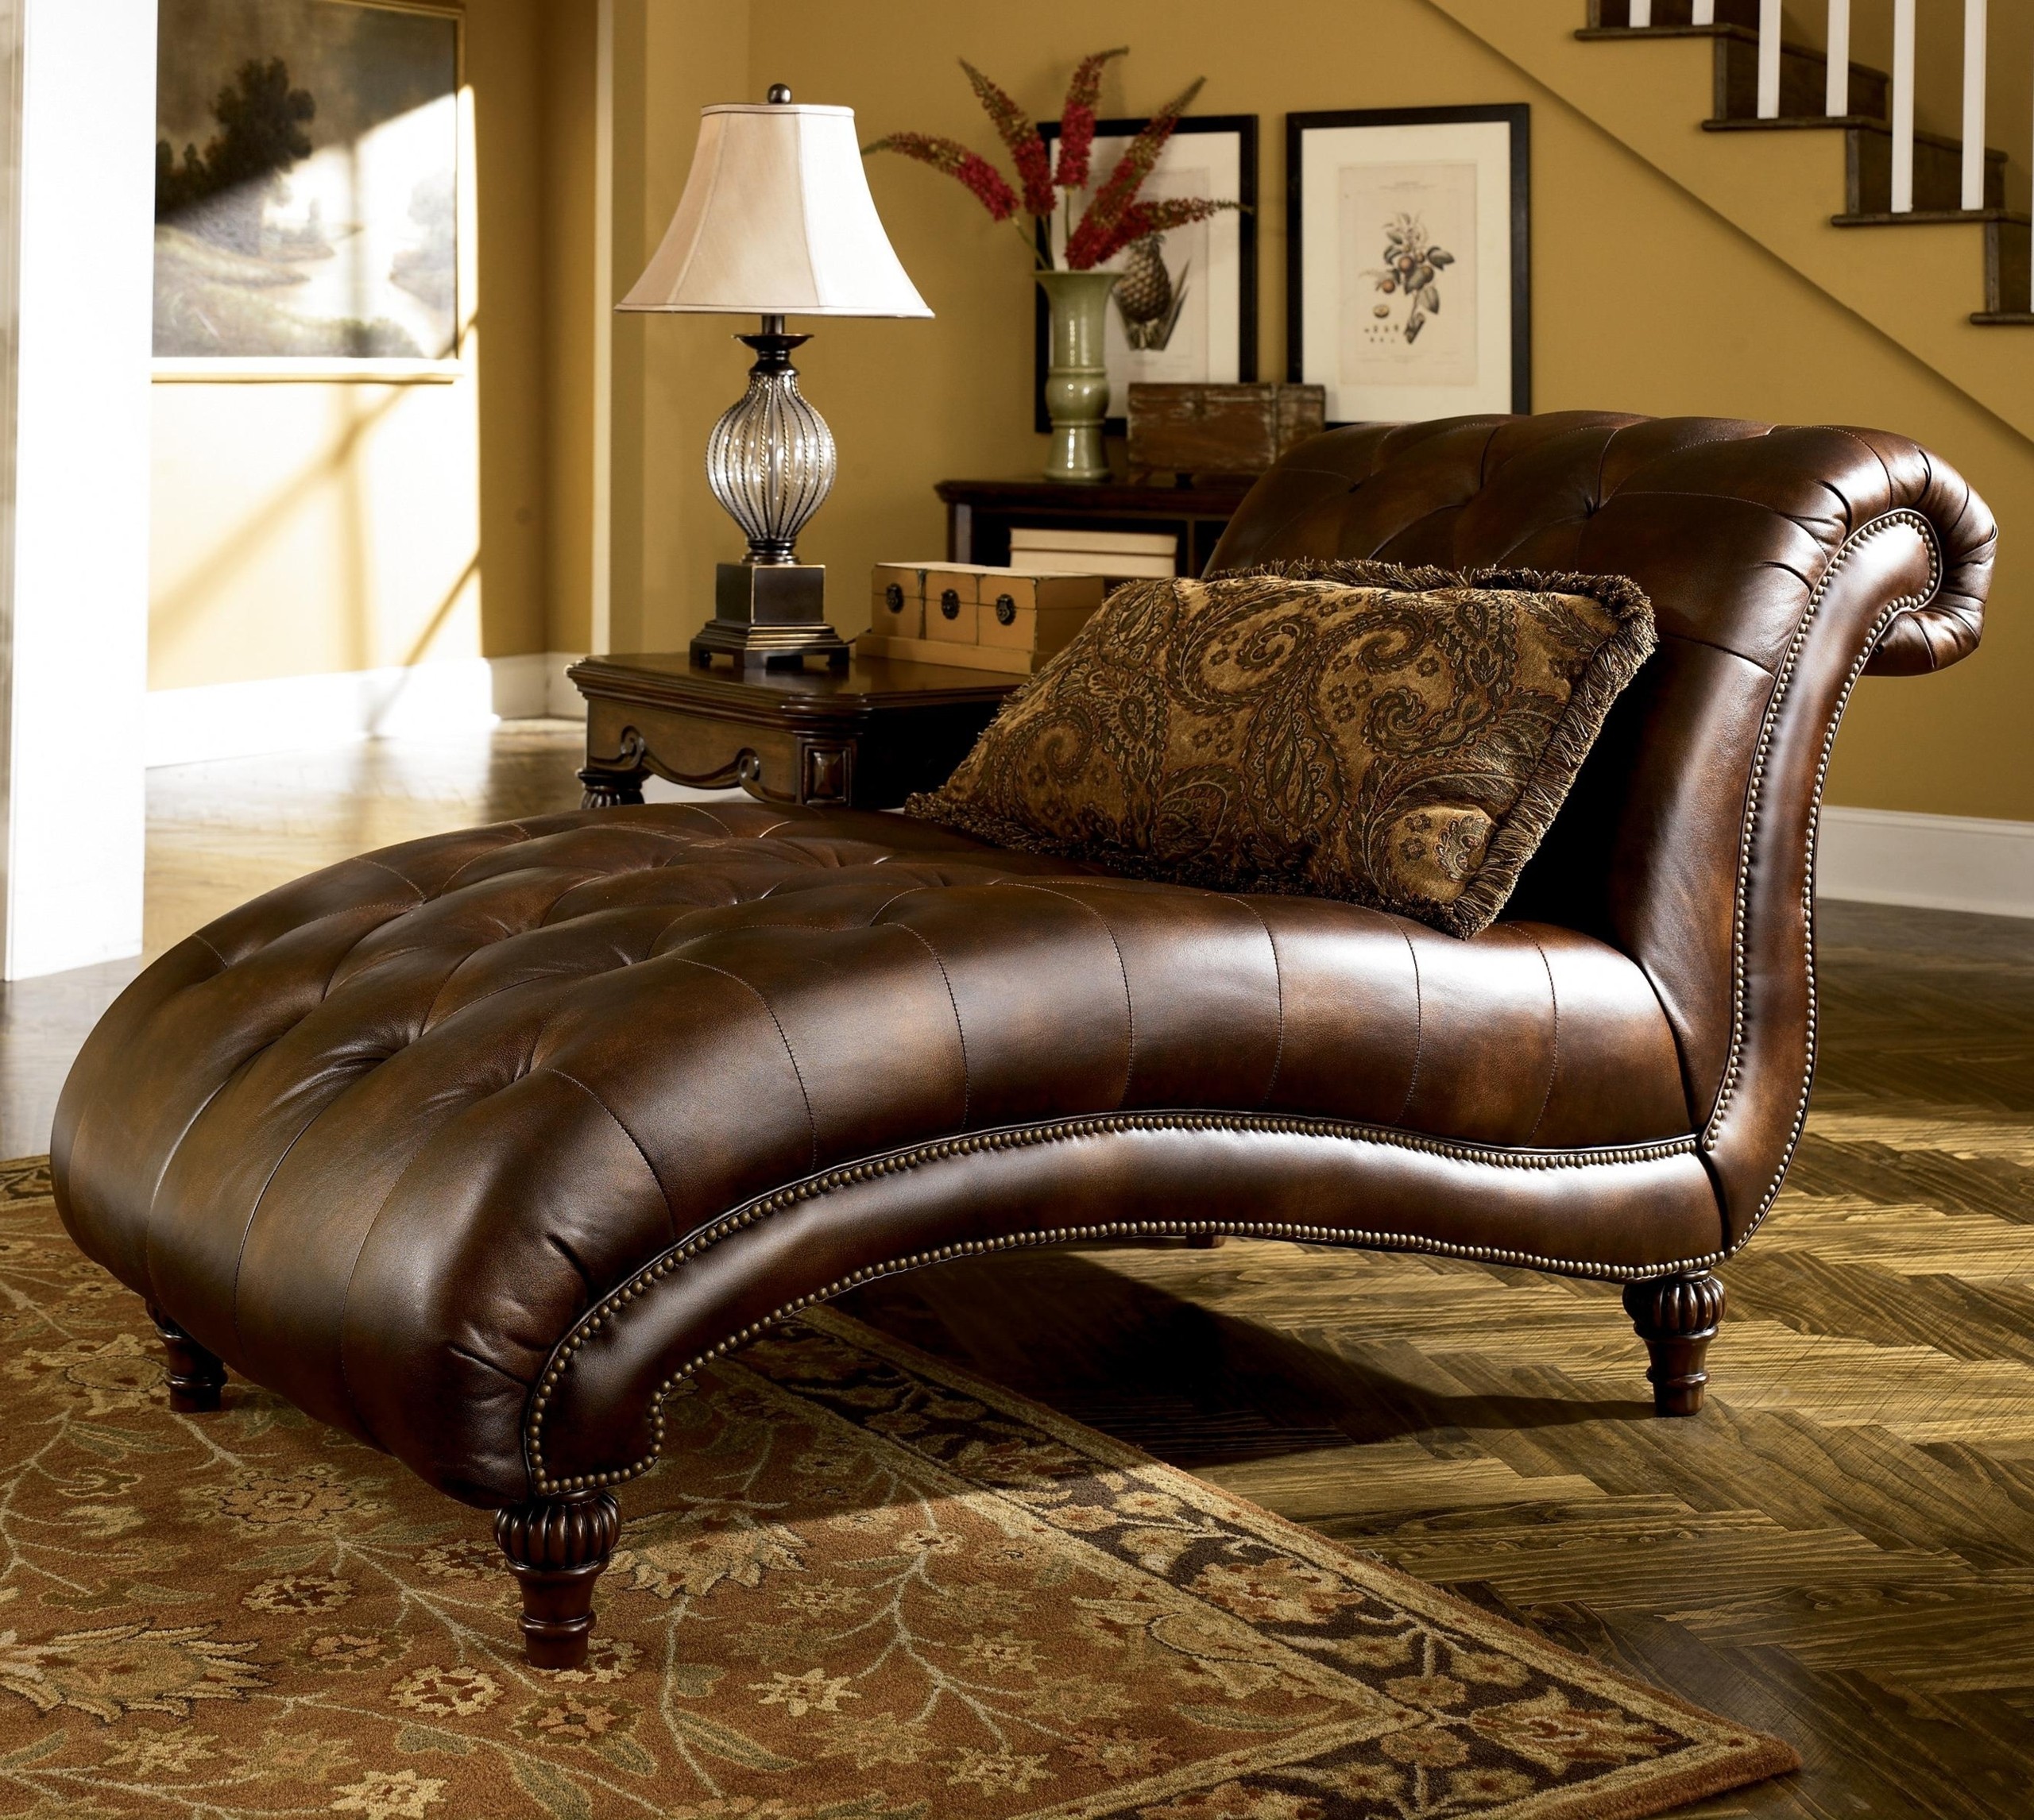 Best 15 of large chaise lounges 1